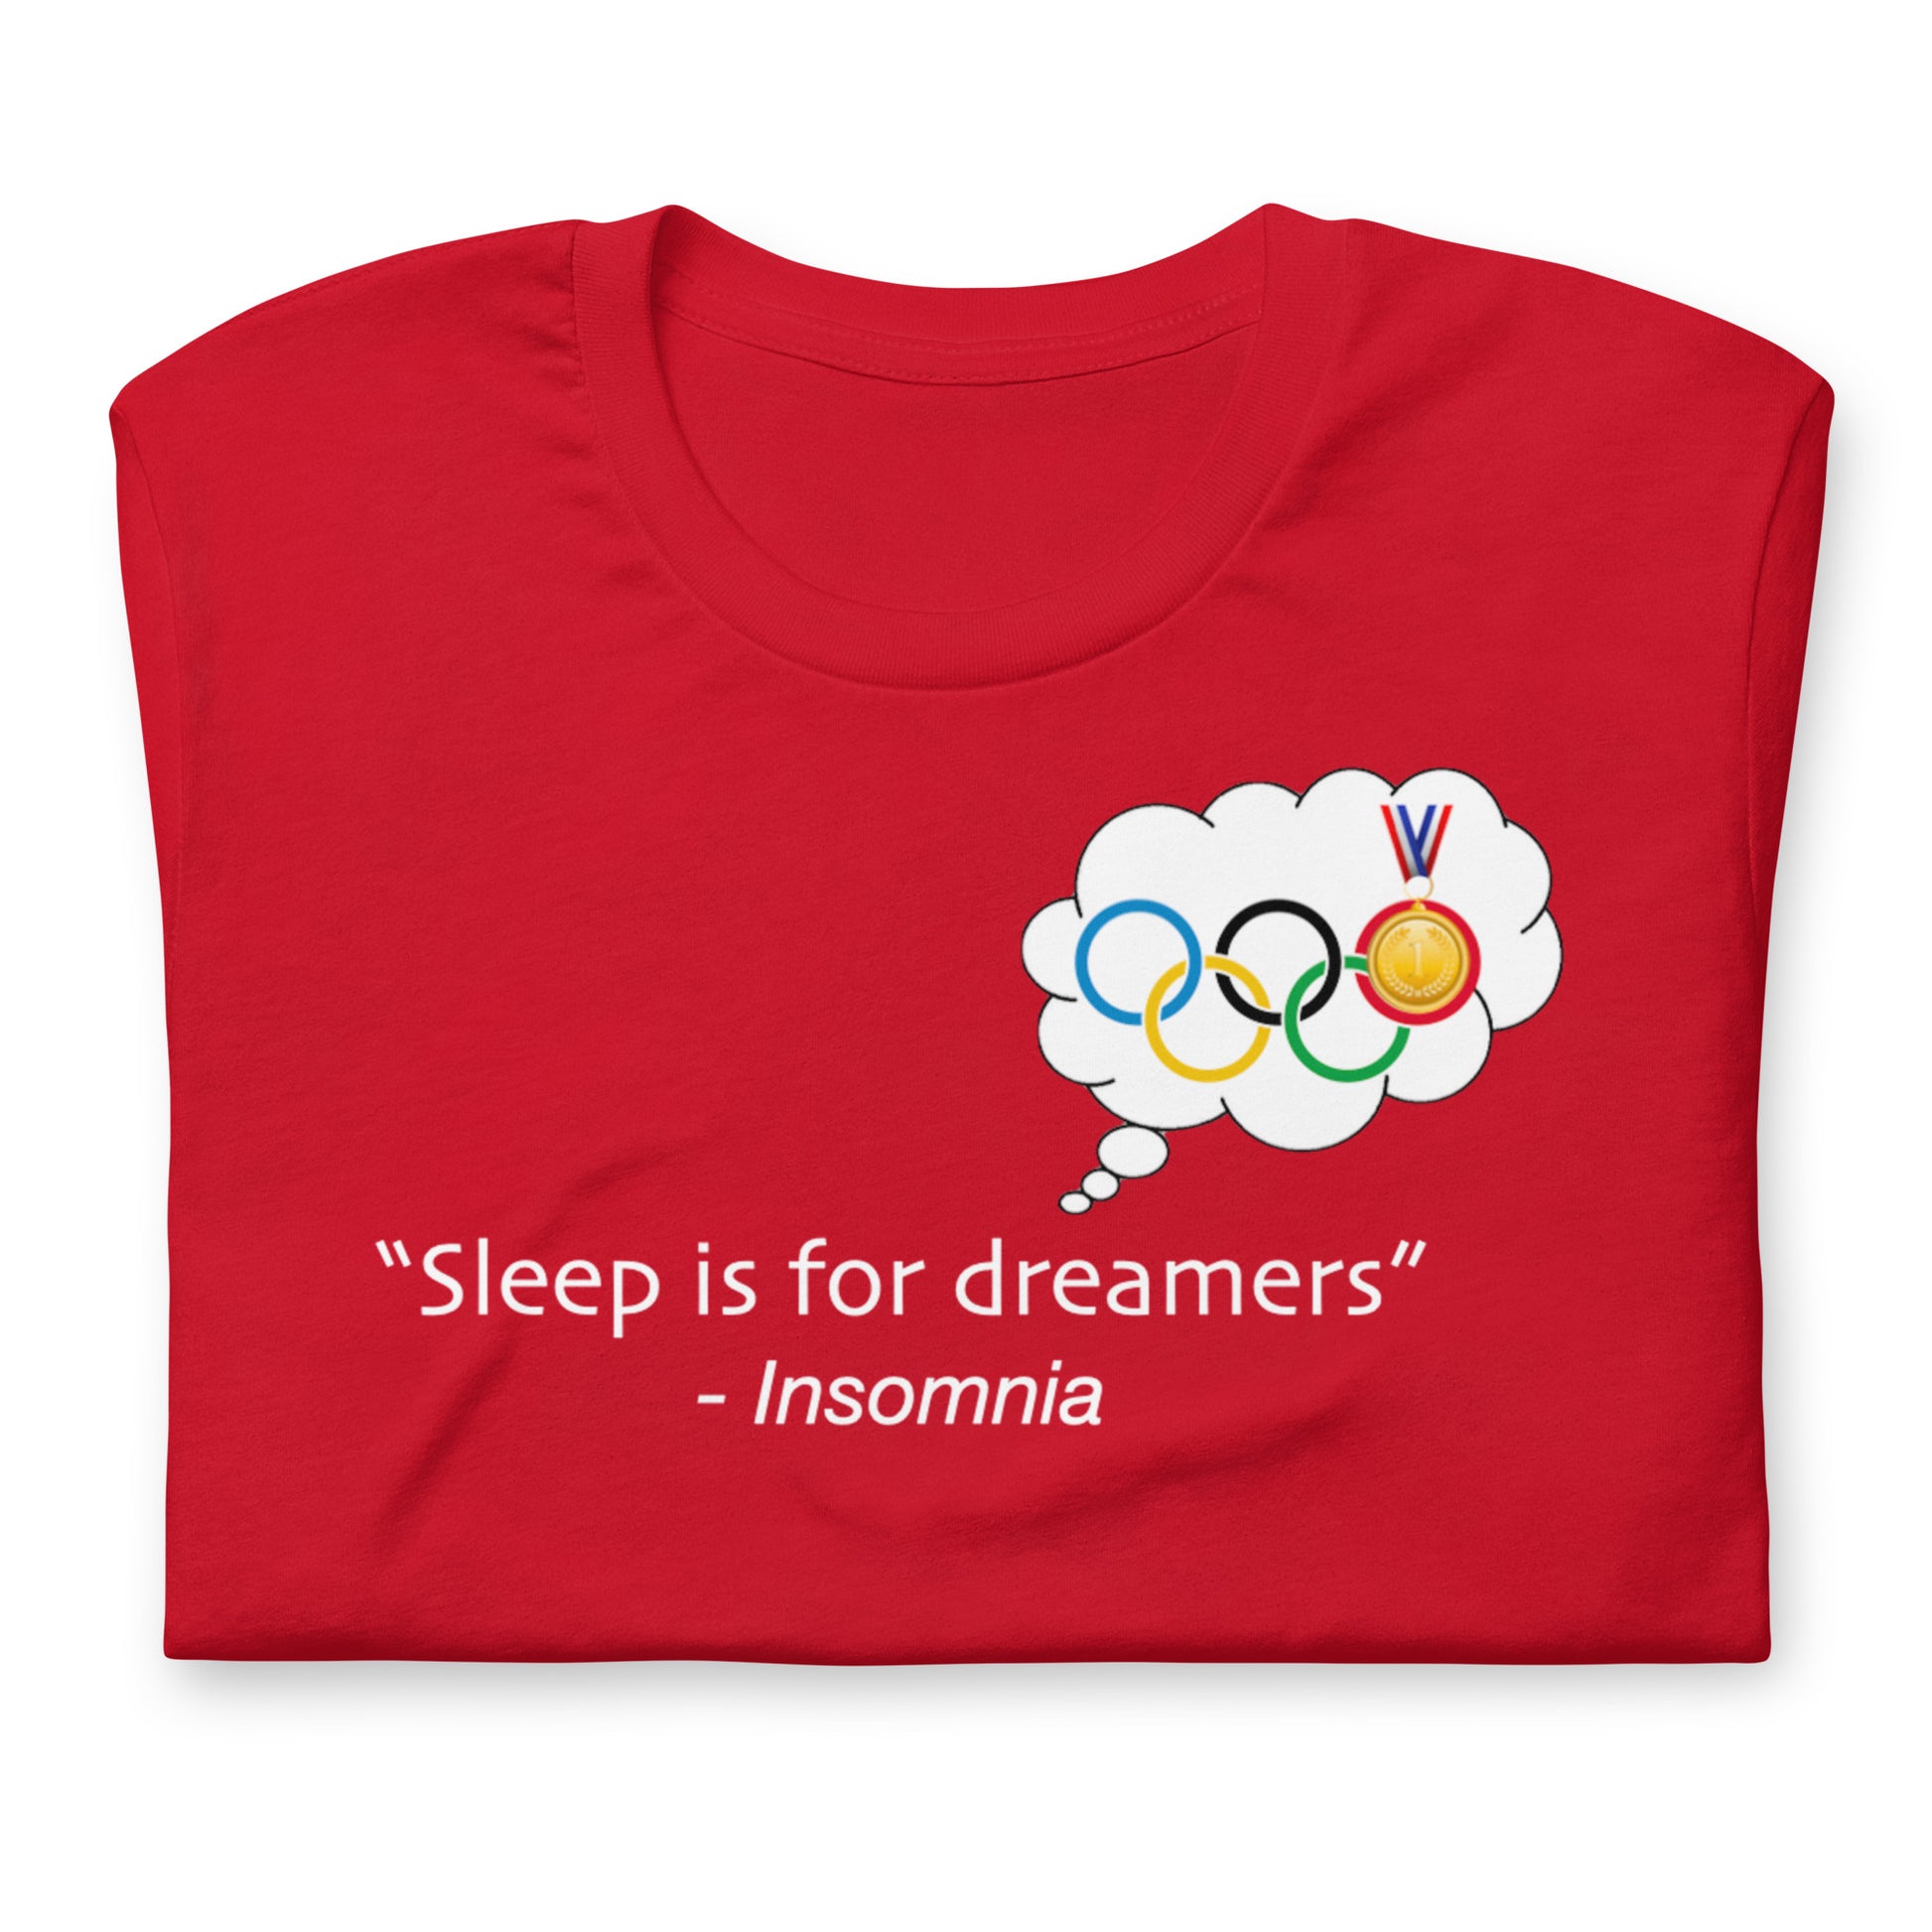 Sleep is for dreamers Athletics - Game Yarns